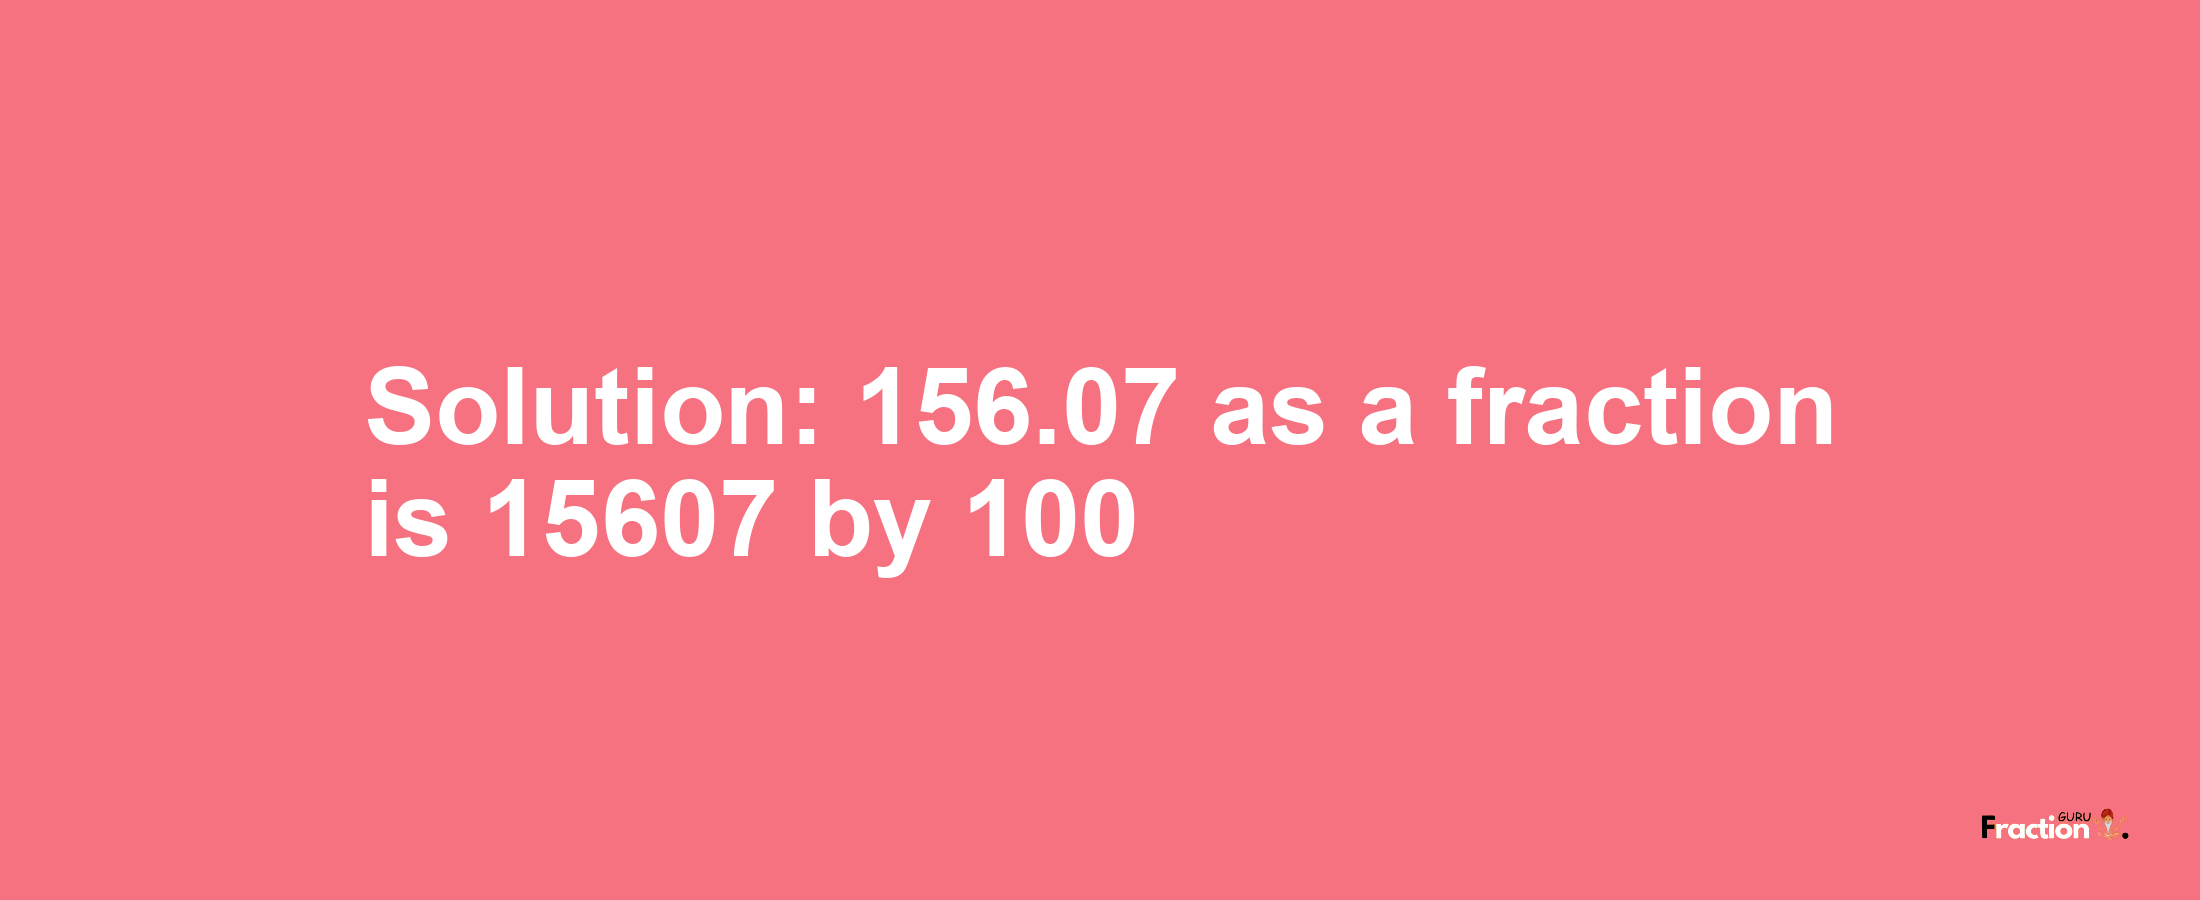 Solution:156.07 as a fraction is 15607/100